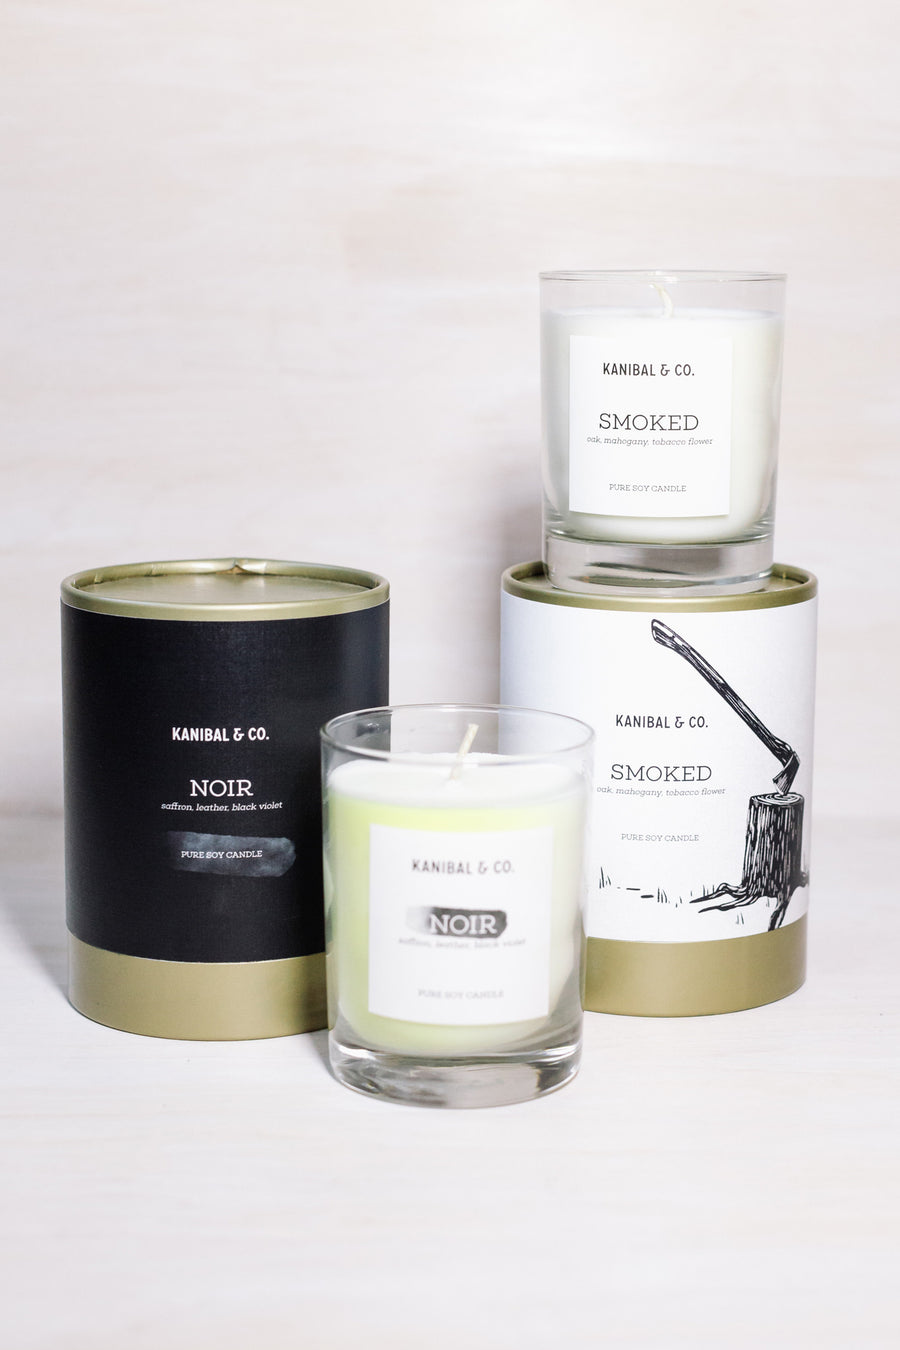 Kanibal & Co. scented candles